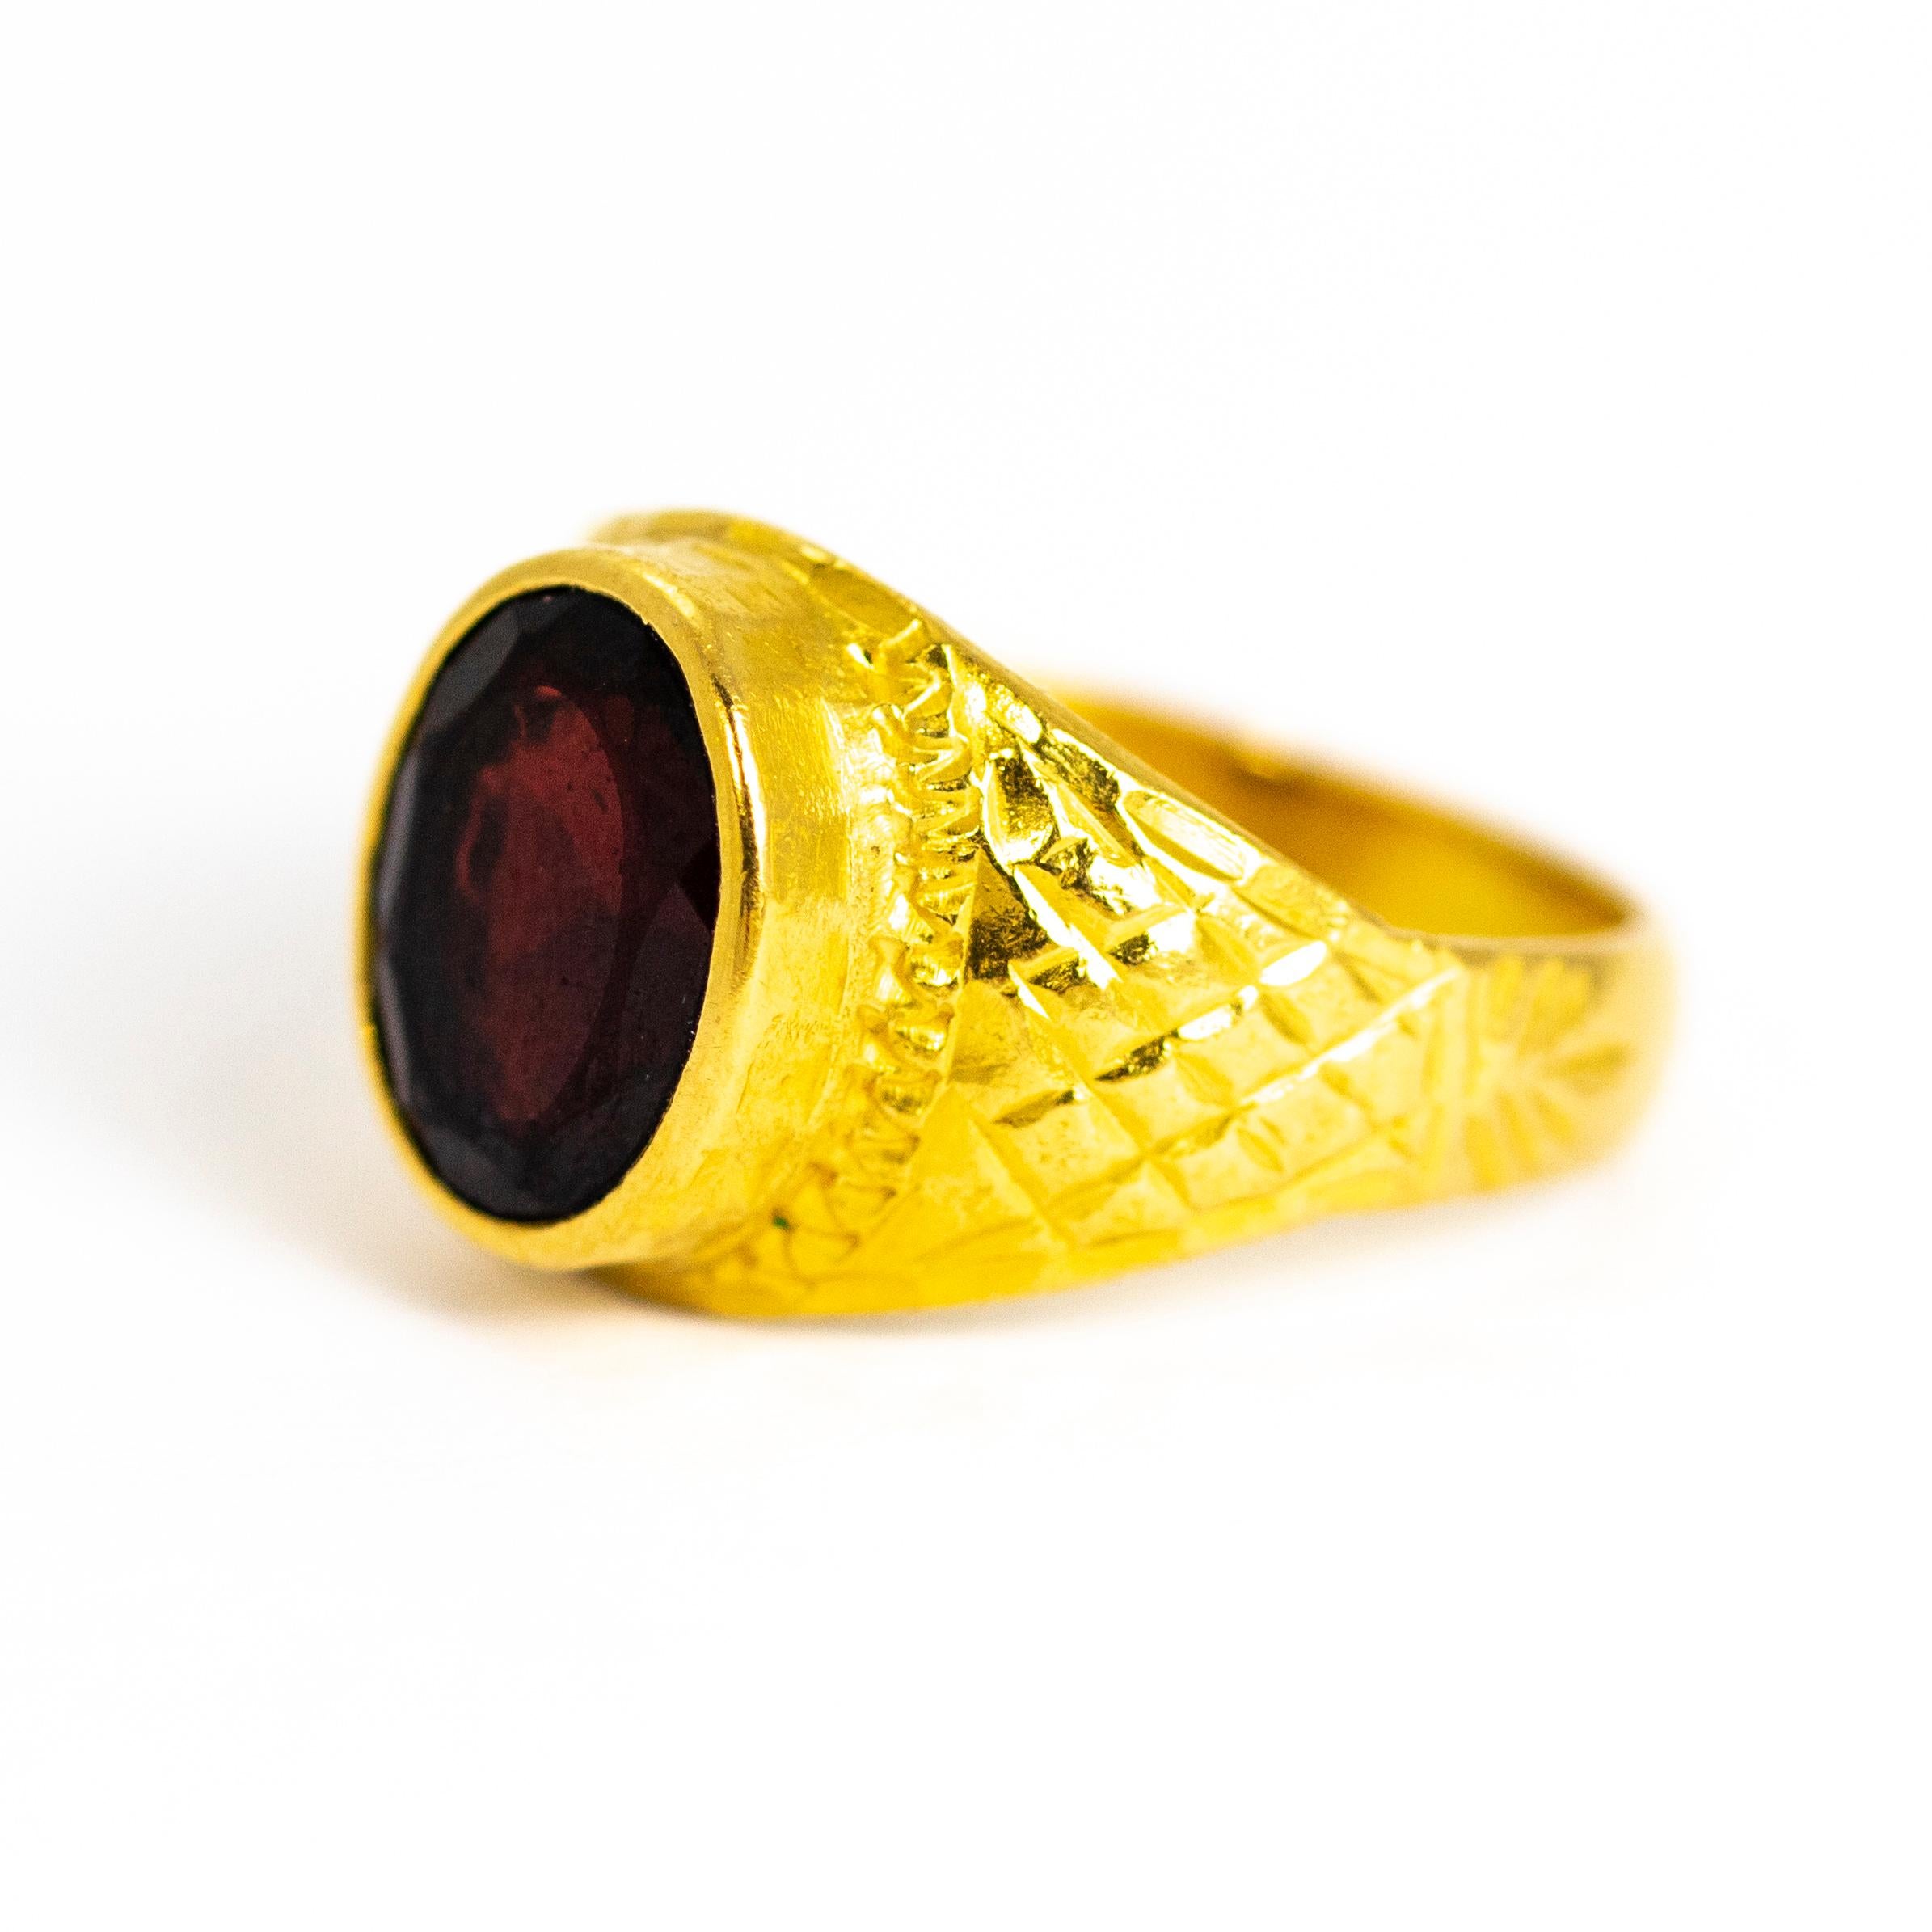 A wonderful vintage signet ring set with a superb flat-cut oval garnet. The stone is surrounded by fine detailing which extends onto the shoulders with a checked pattern. Modelled in 18 carat yellow gold

Stone Width: 3.50mm

Stone Height: